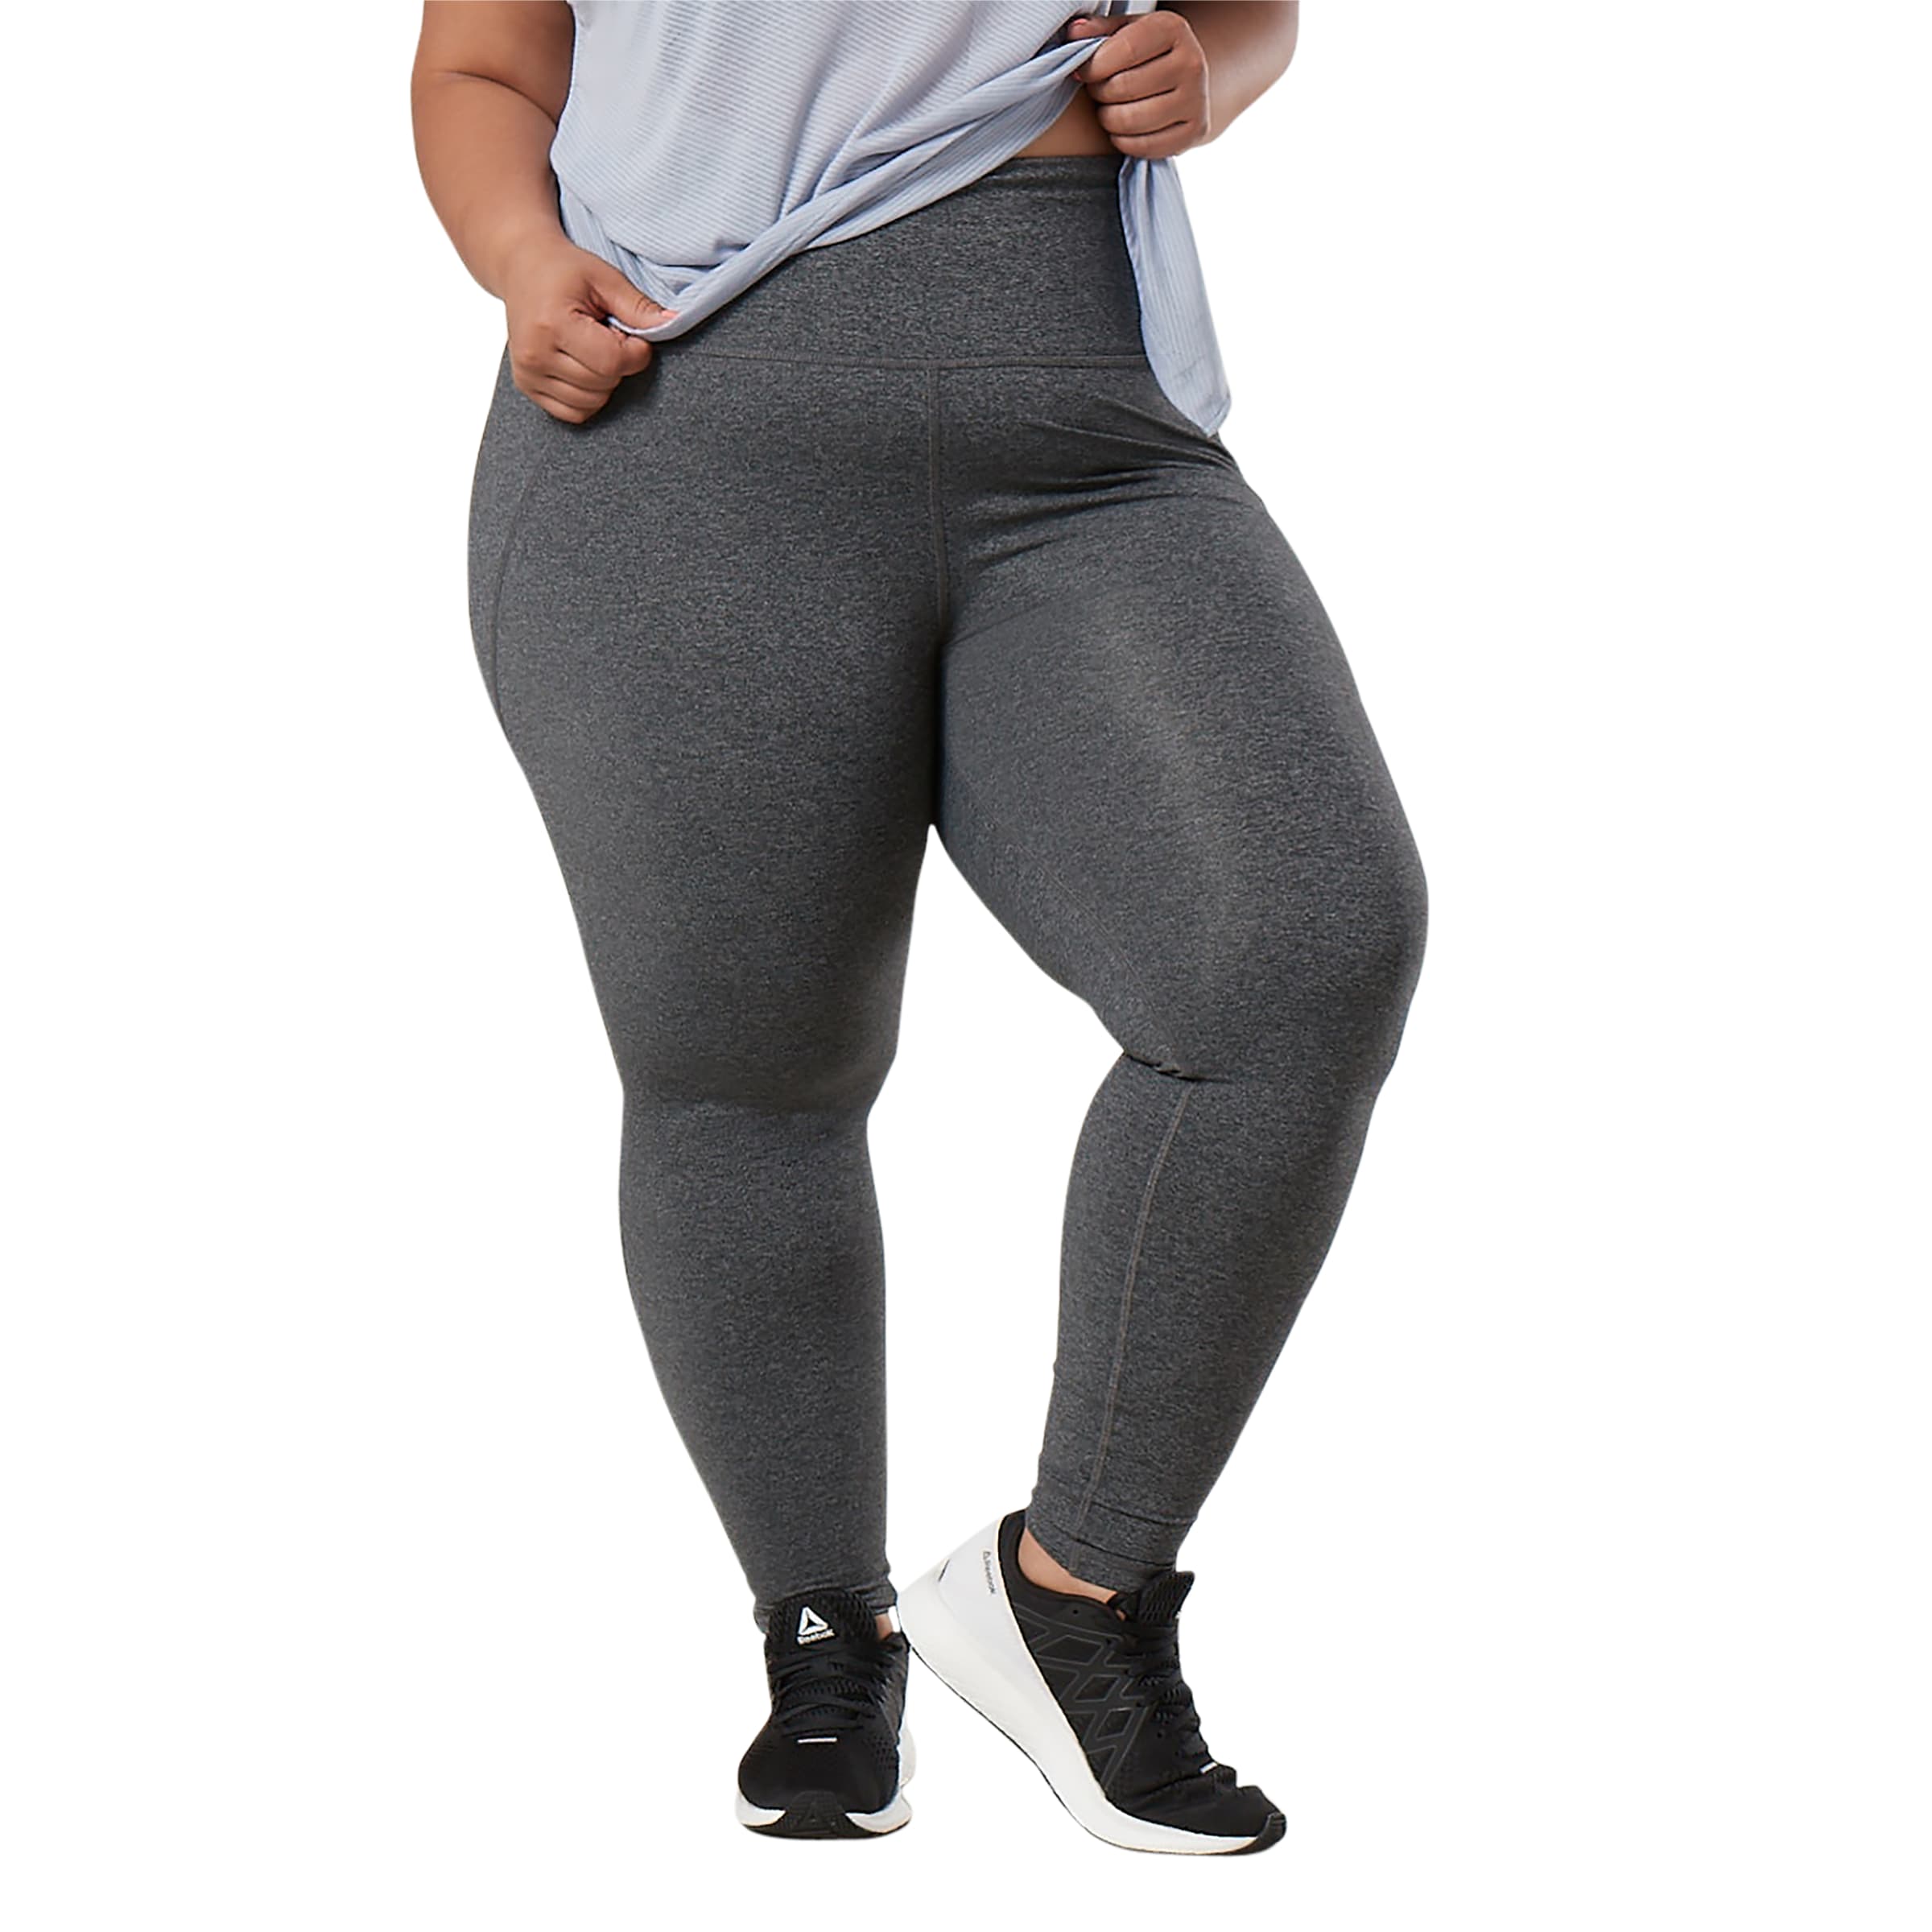 reebok lux tight crafted by fitness